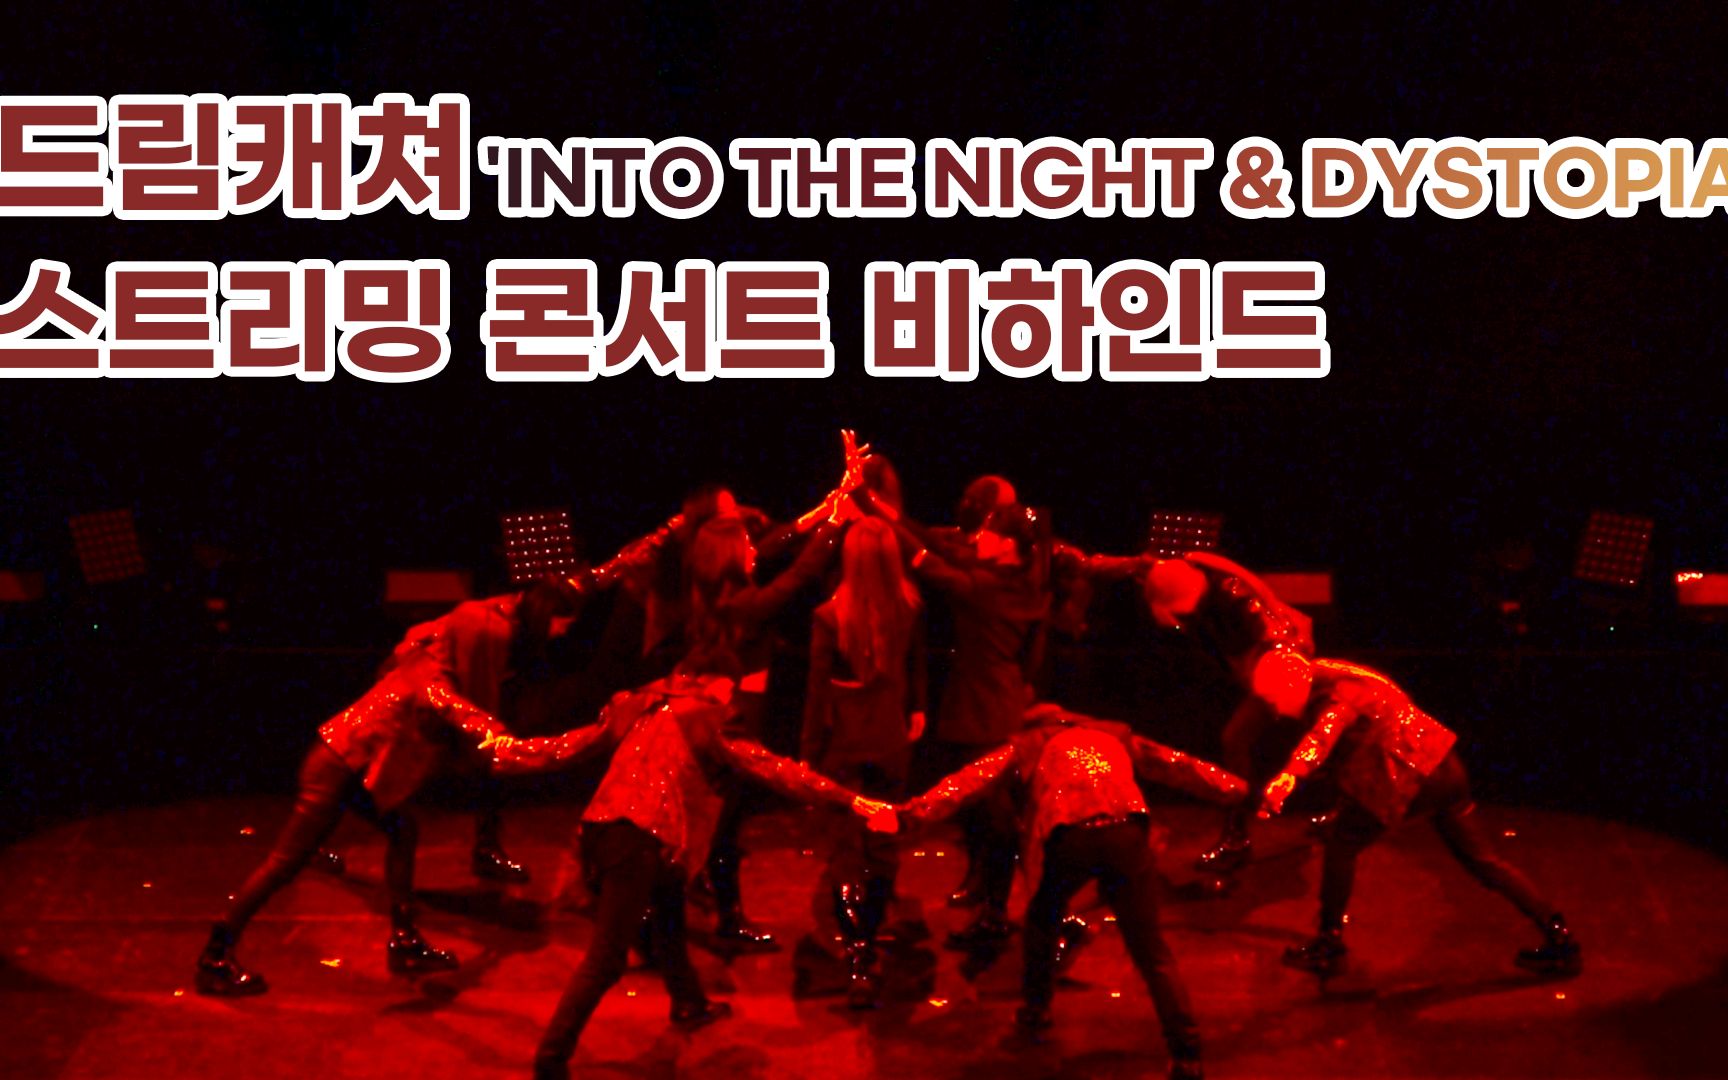 [Dreamcatcher's Note] 'INTO THE NIGHT & DYSTOPIA' Streaming Concert Behind